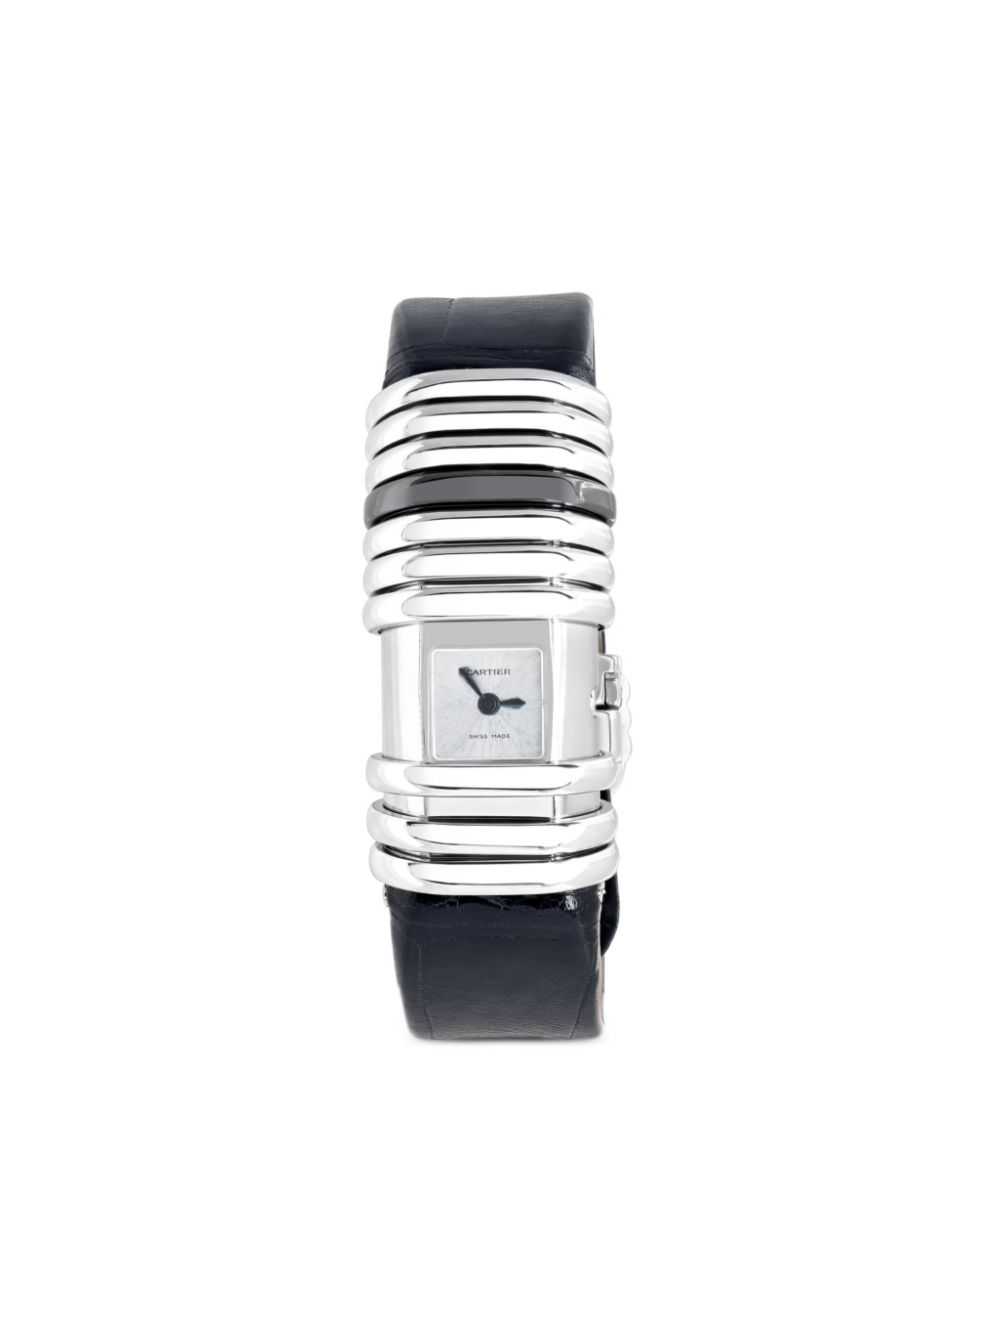 Cartier pre-owned Declaration 16mm - Silver - image 1